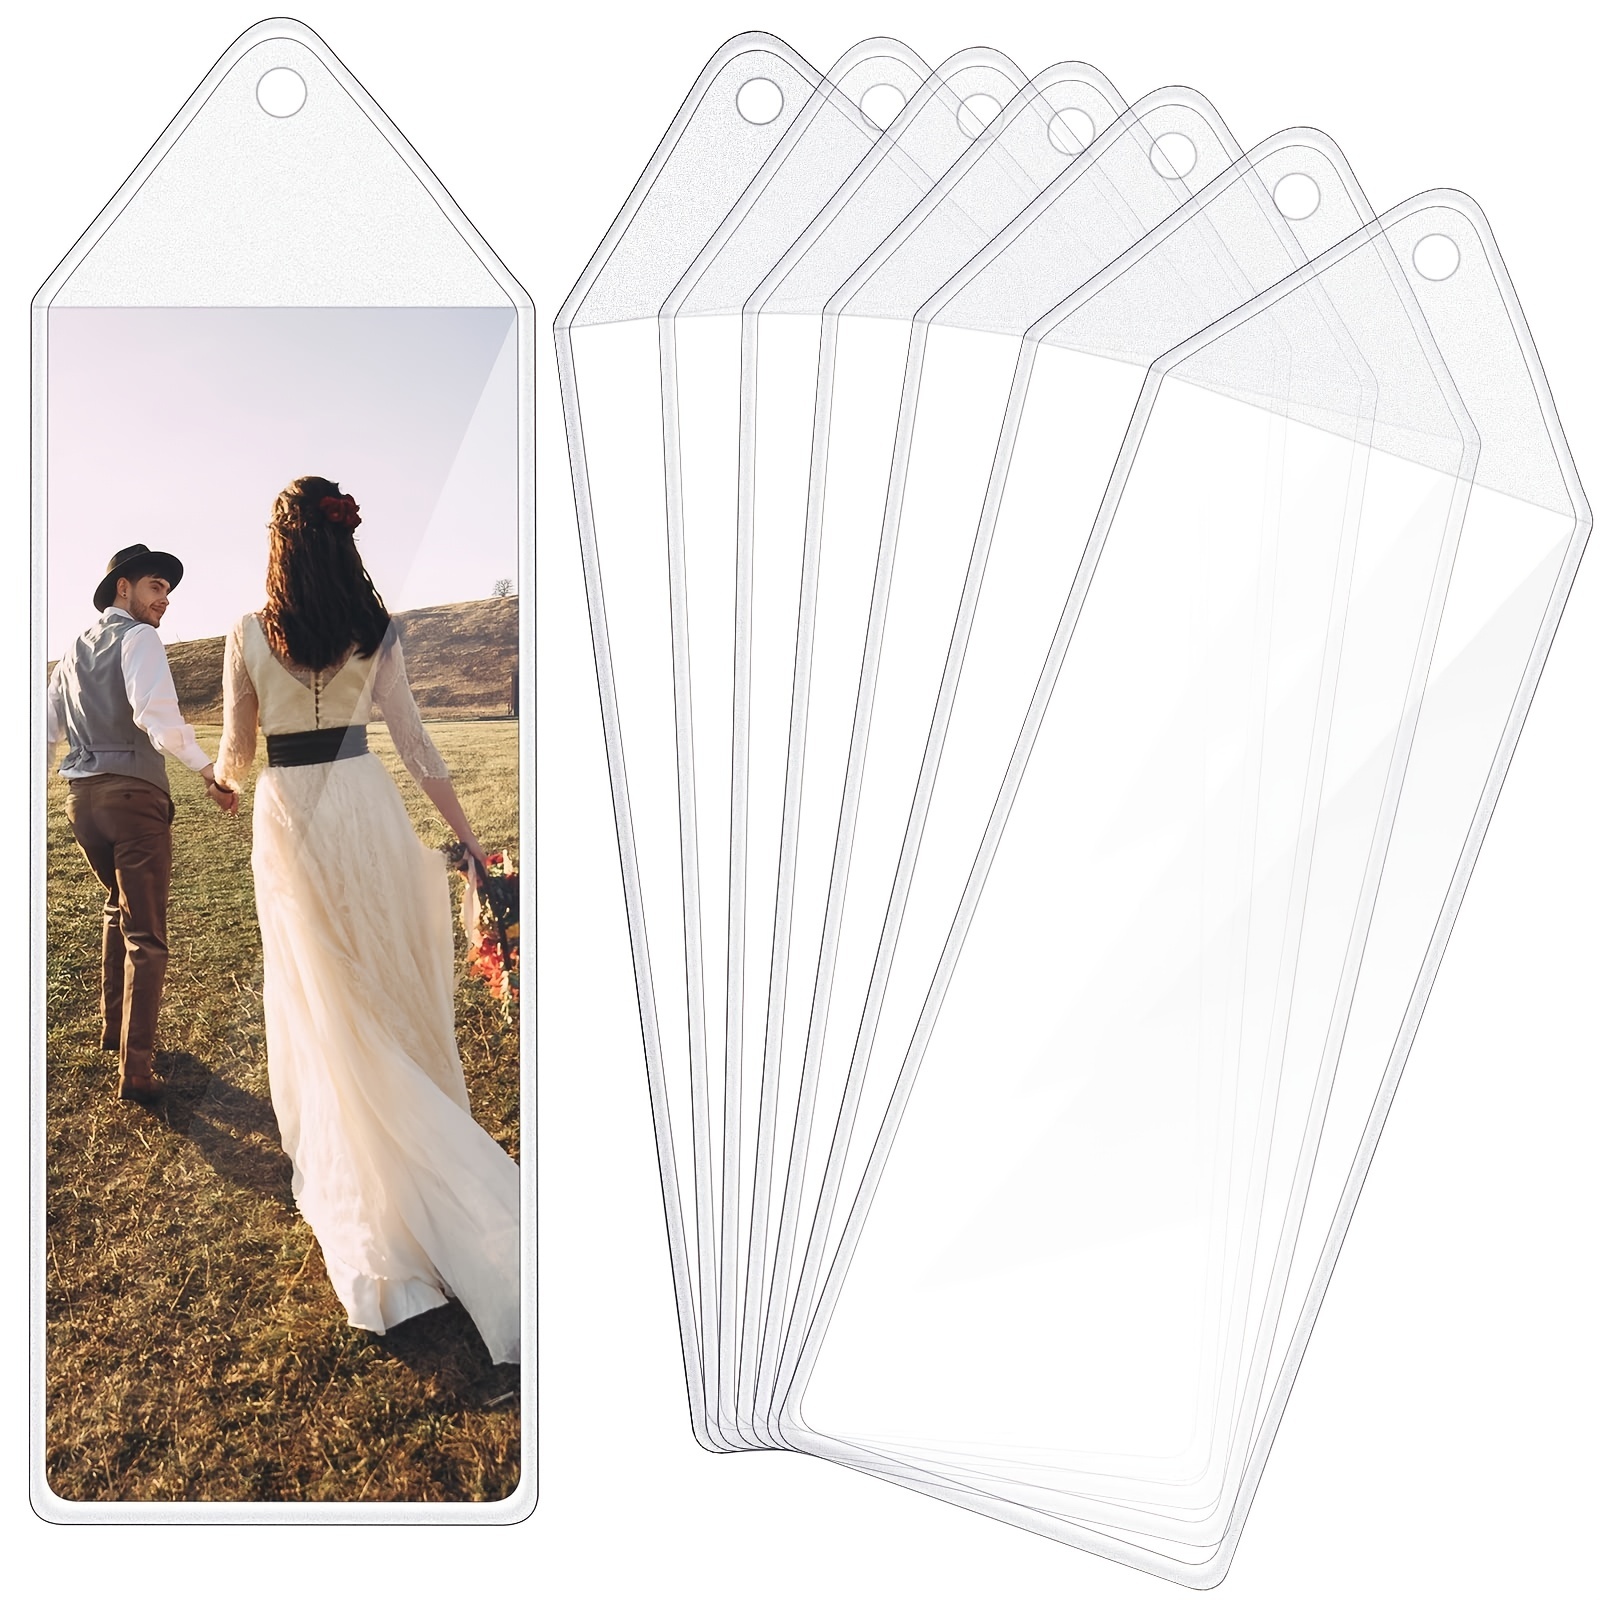 Photo Booth Nook Bookmark Sleeves - Vinyl Photobooth Strip Frames, Picture Strip Holder, Lightweight, Shatterproof Material - Ideas for Party Favors